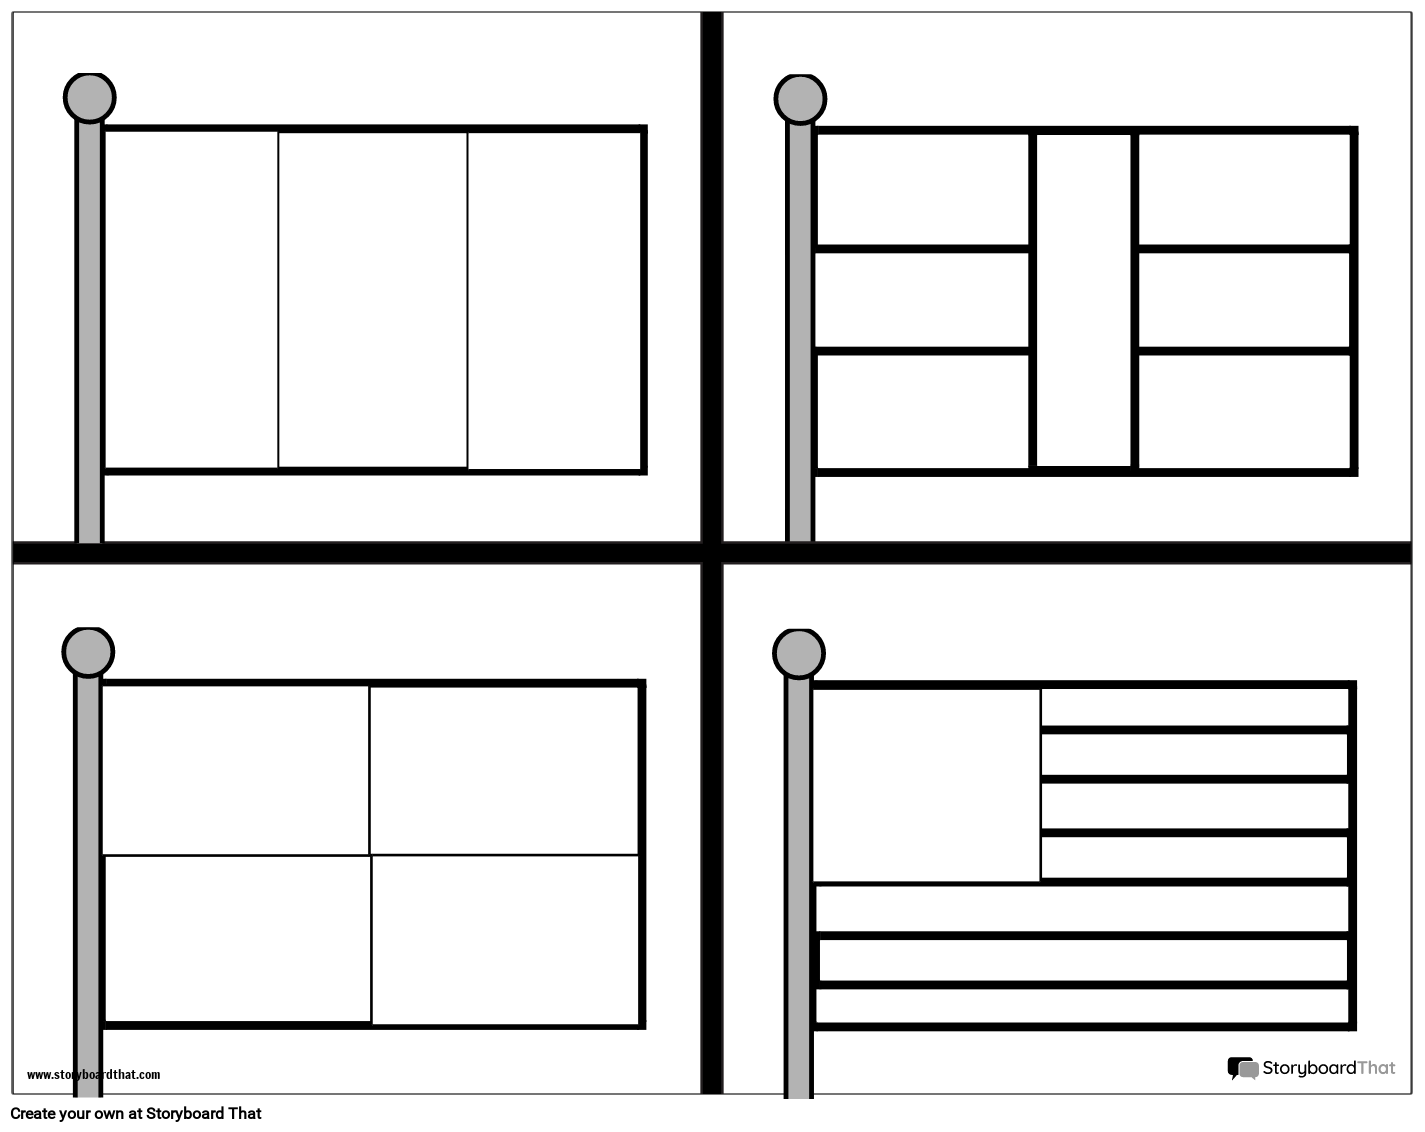 Flag Worksheet Featuring Flags with Different Shapes